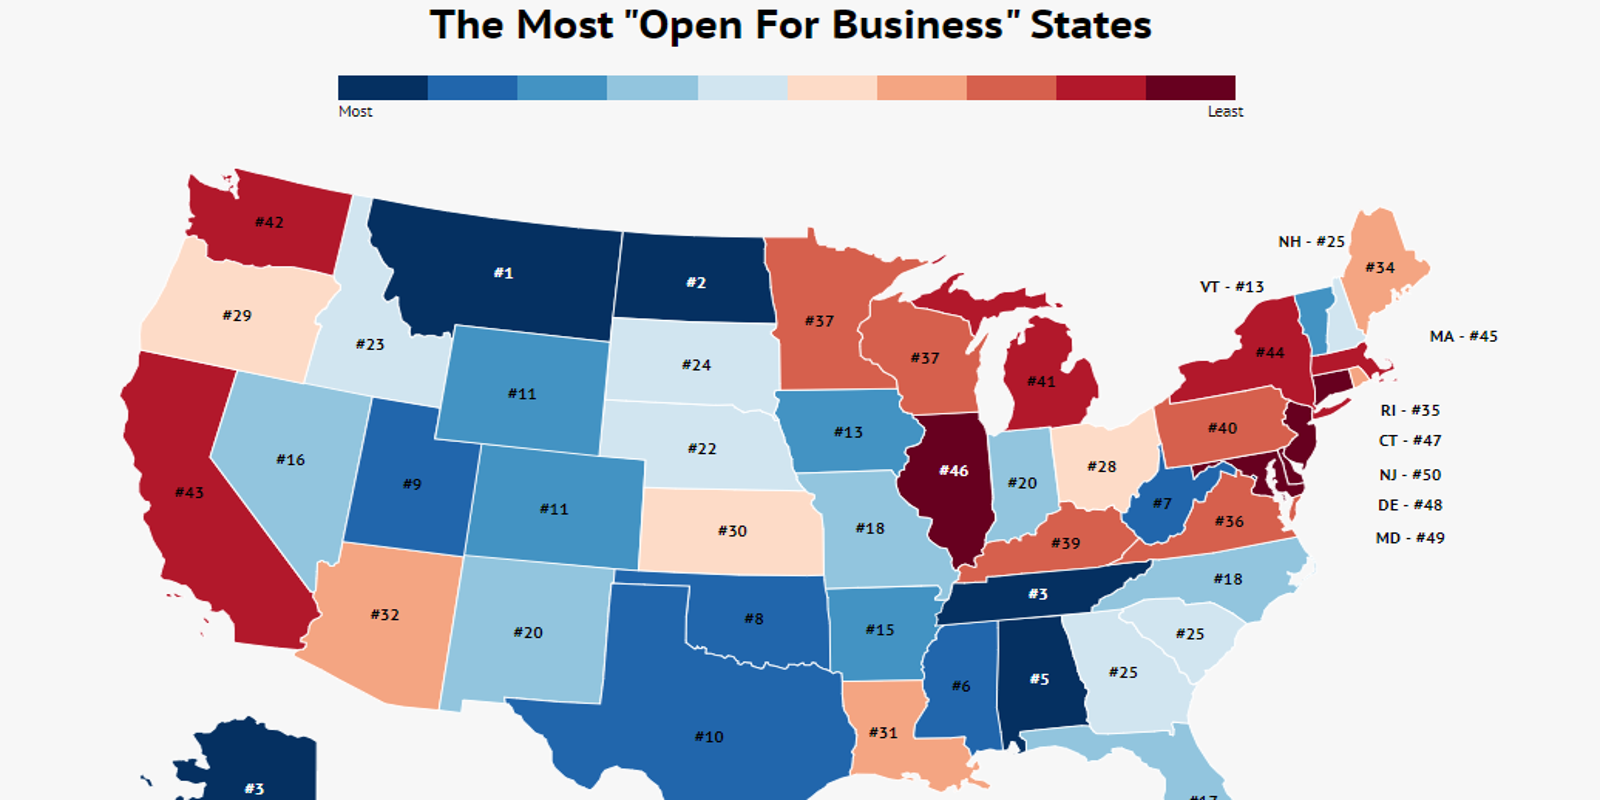 Texas in top 10 states most open for business